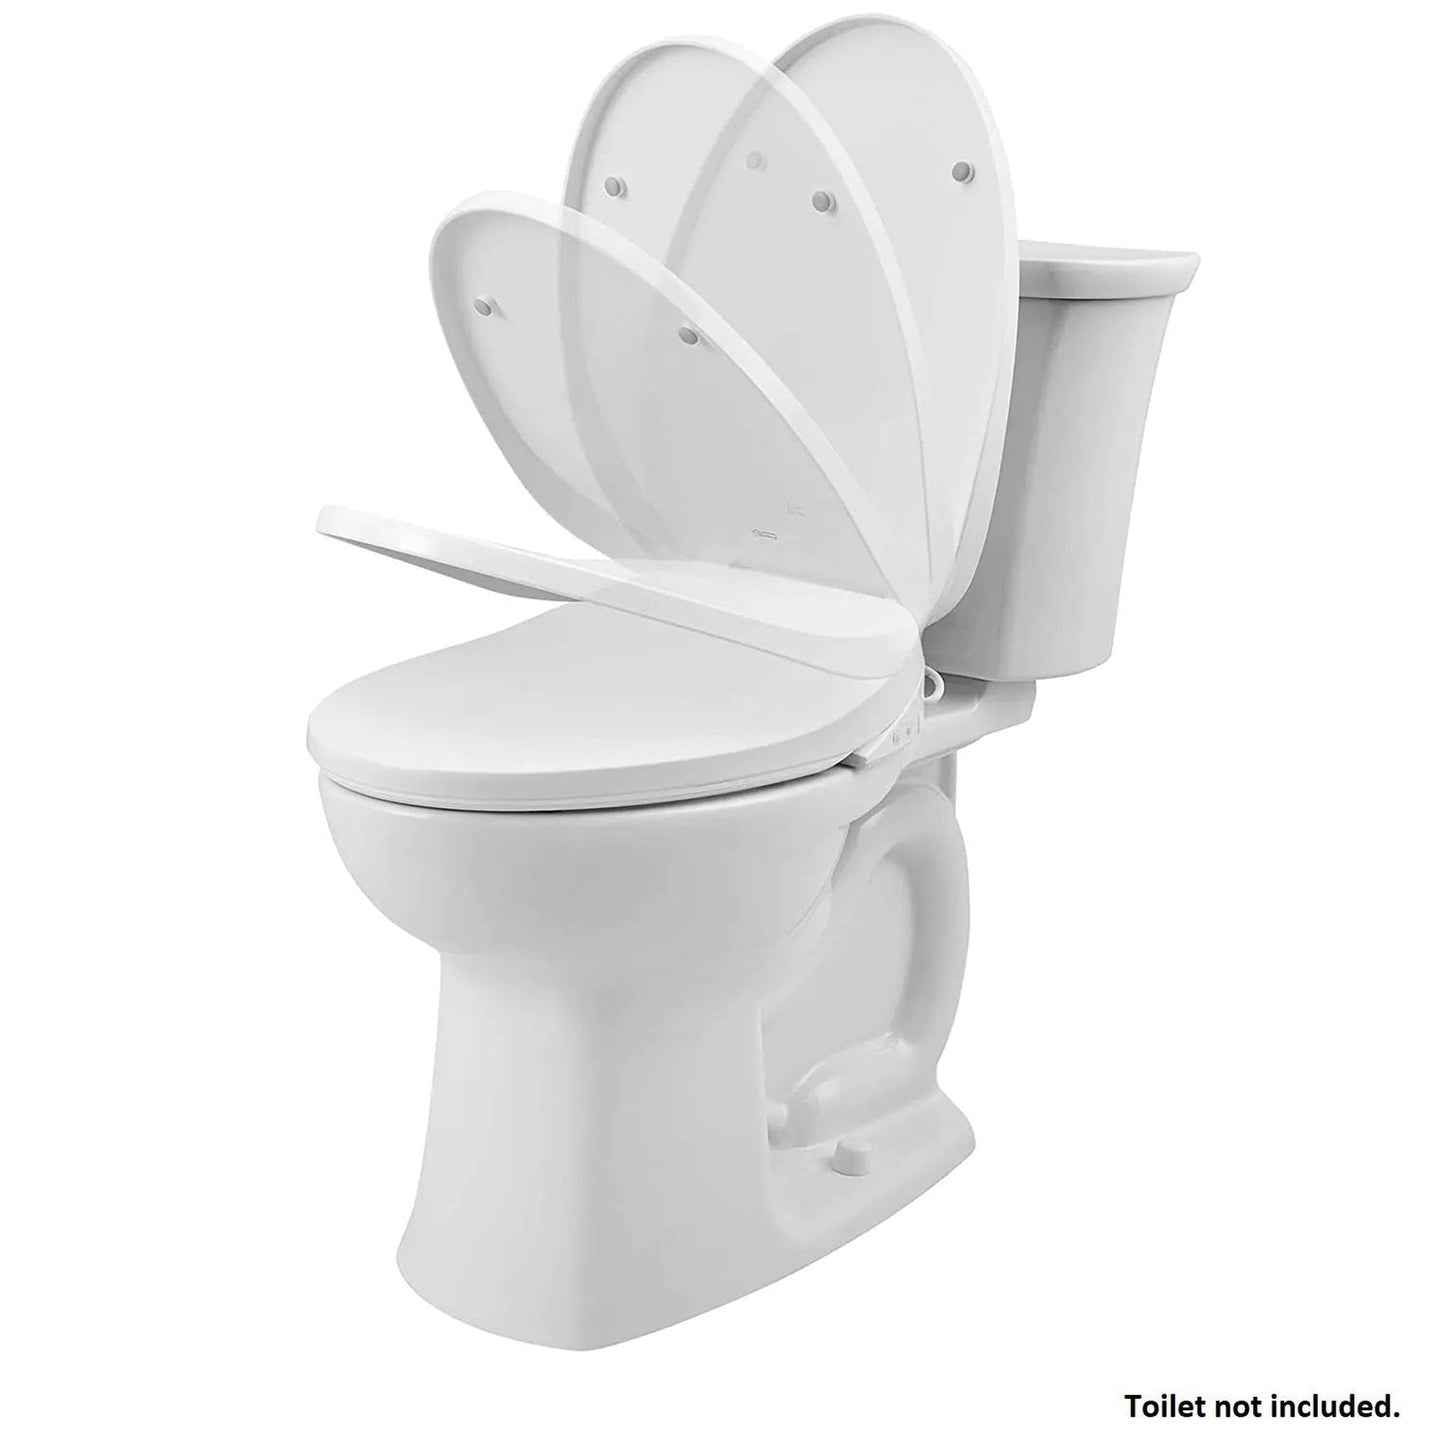 Aim to Wash! 20" Elongated White Electric Smart Bidet Toilet Seat With Knob Control Operation